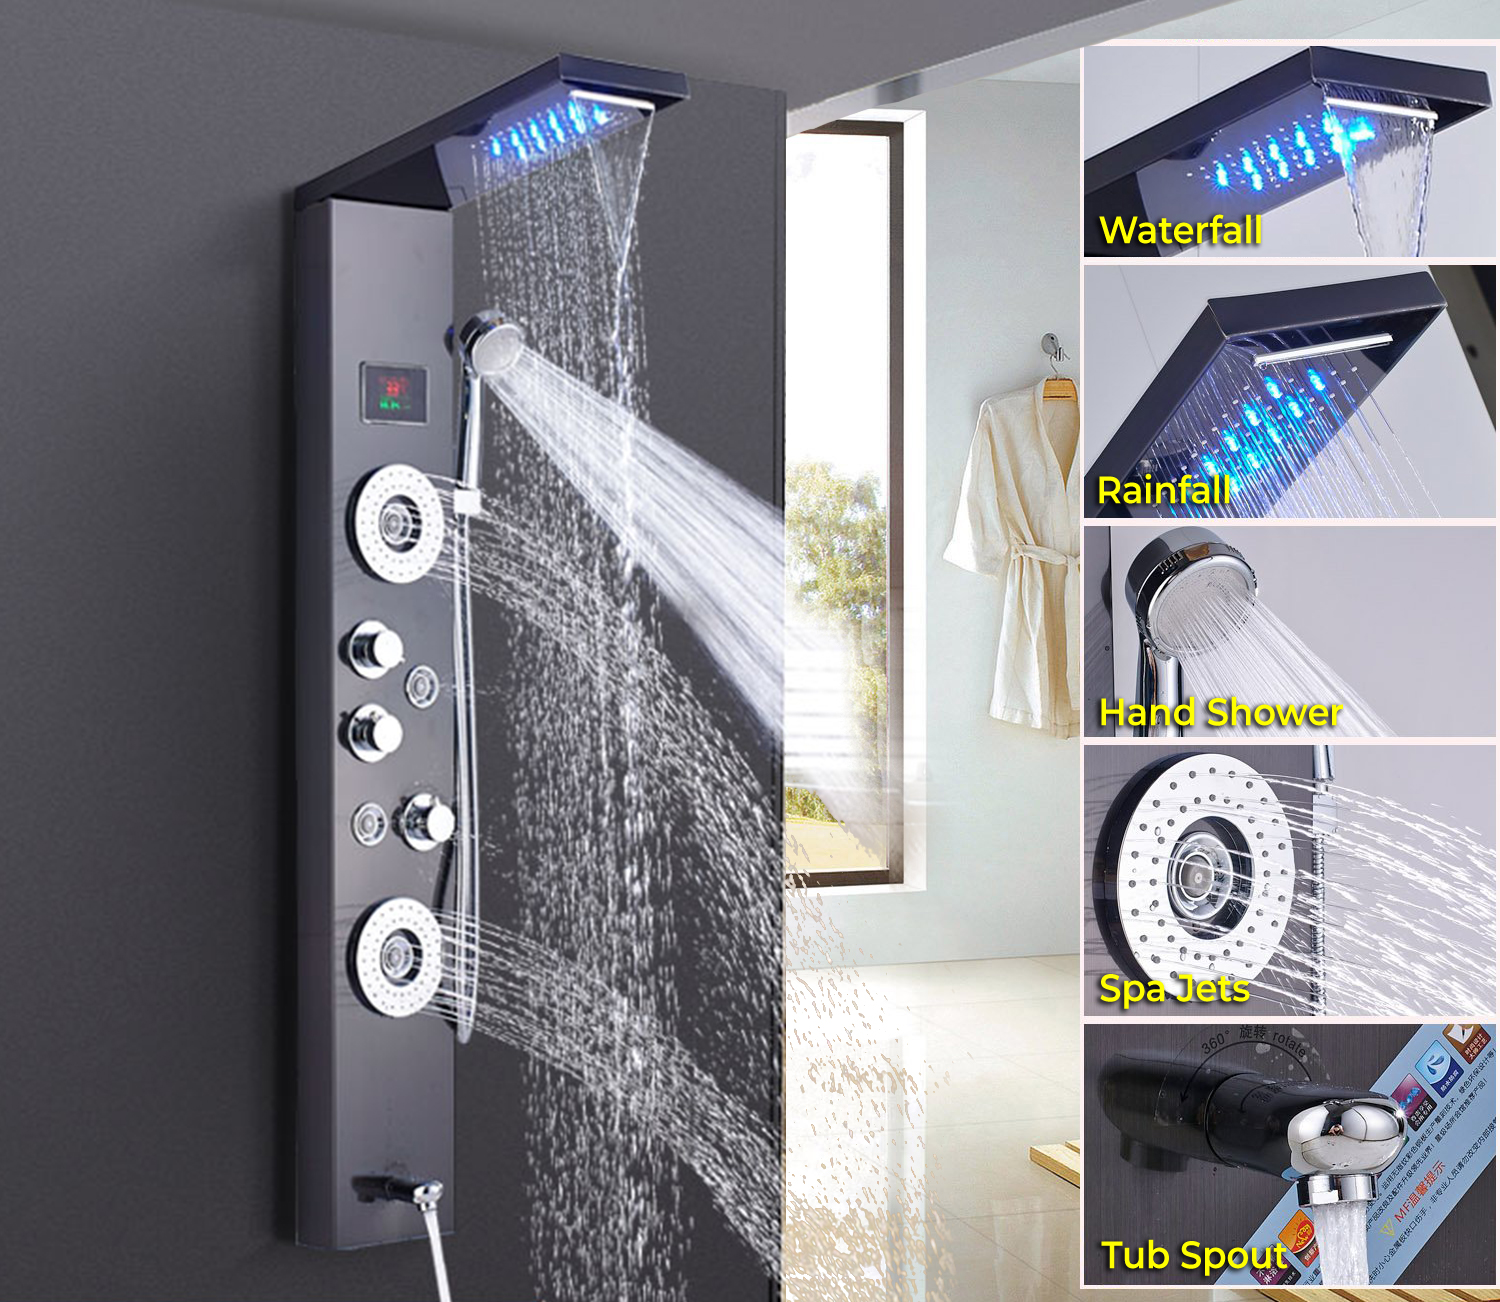 Juno LED Temperature Display Bathroom Shower Panel with Hand Shower